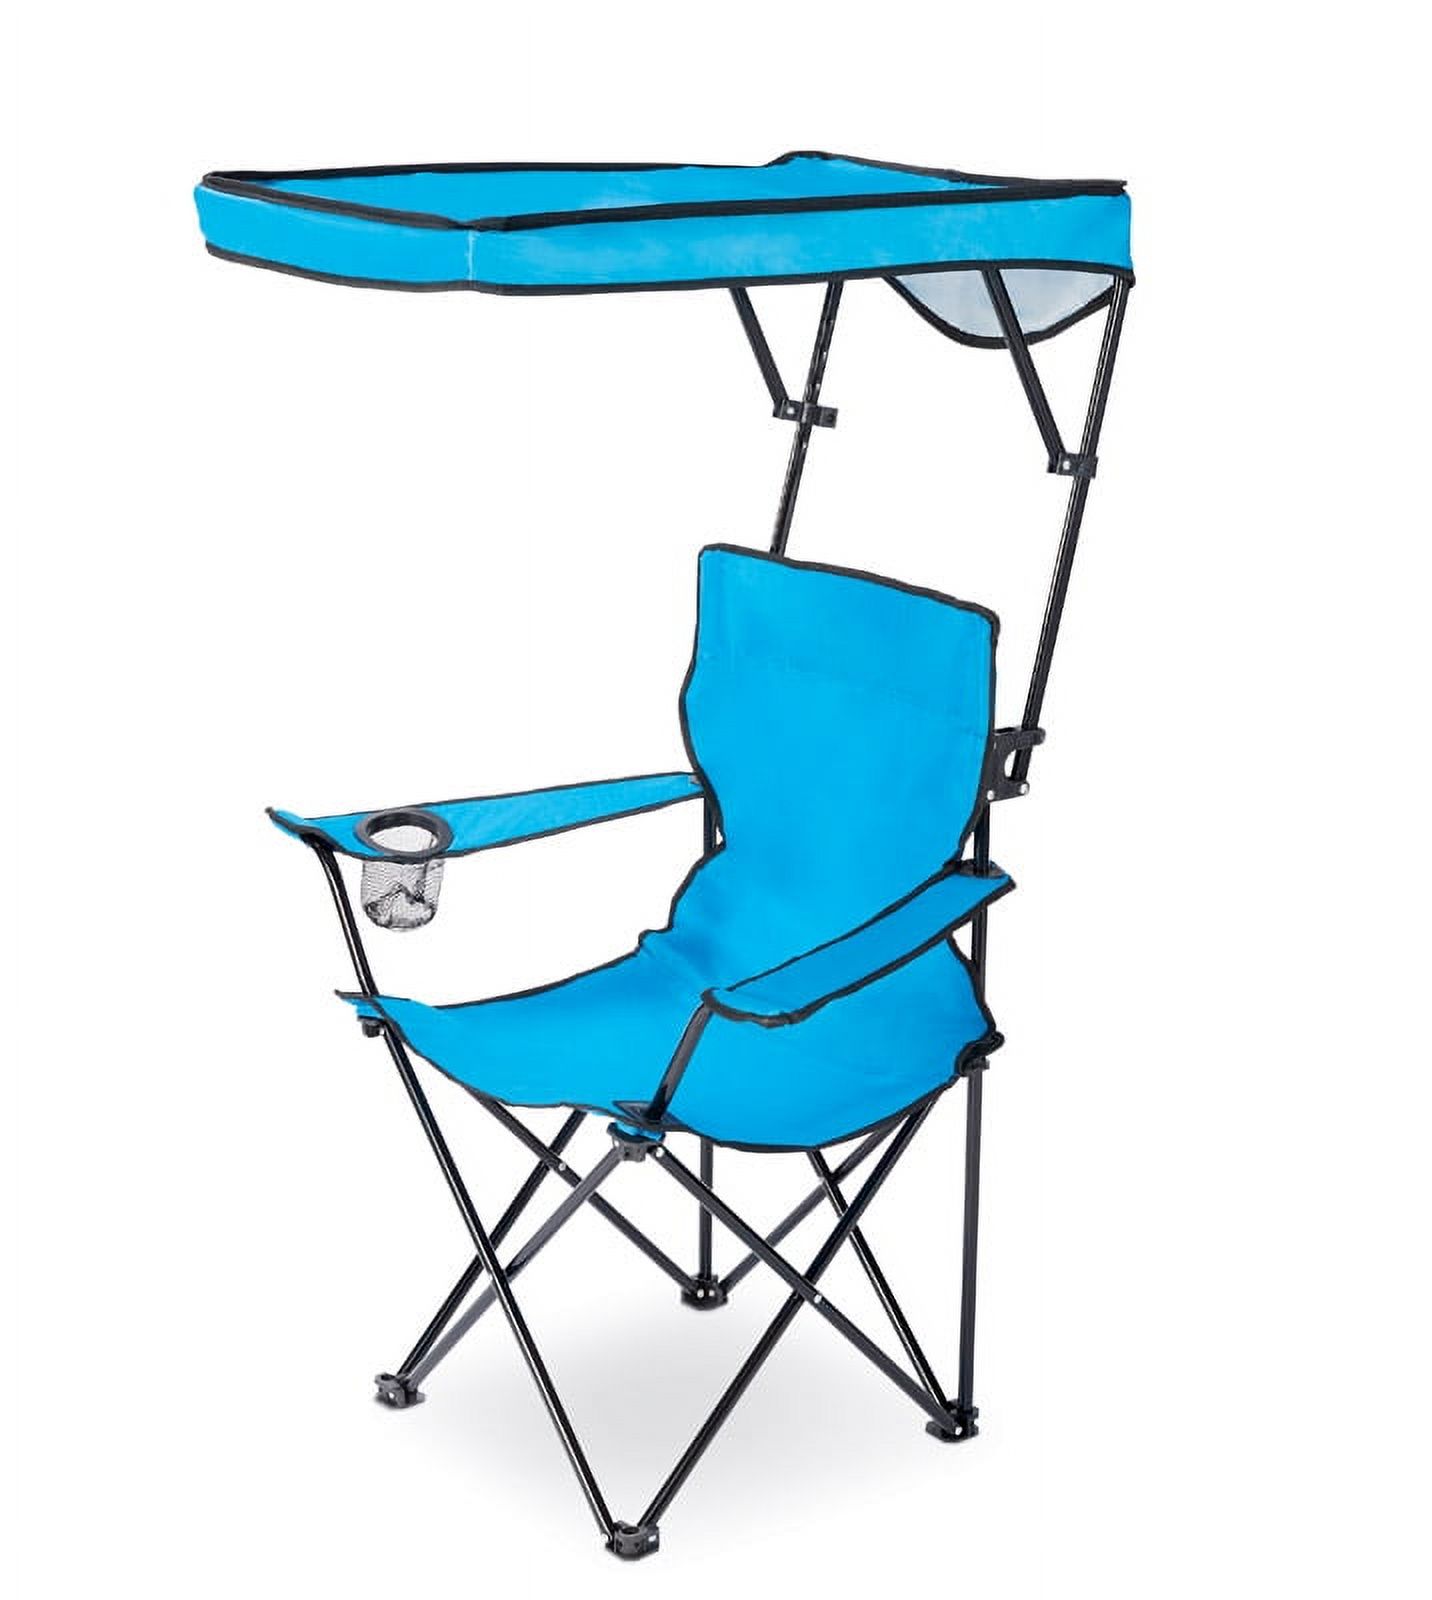 Quik Shade Basic Adjustable Blue Canopy Chair - image 4 of 4